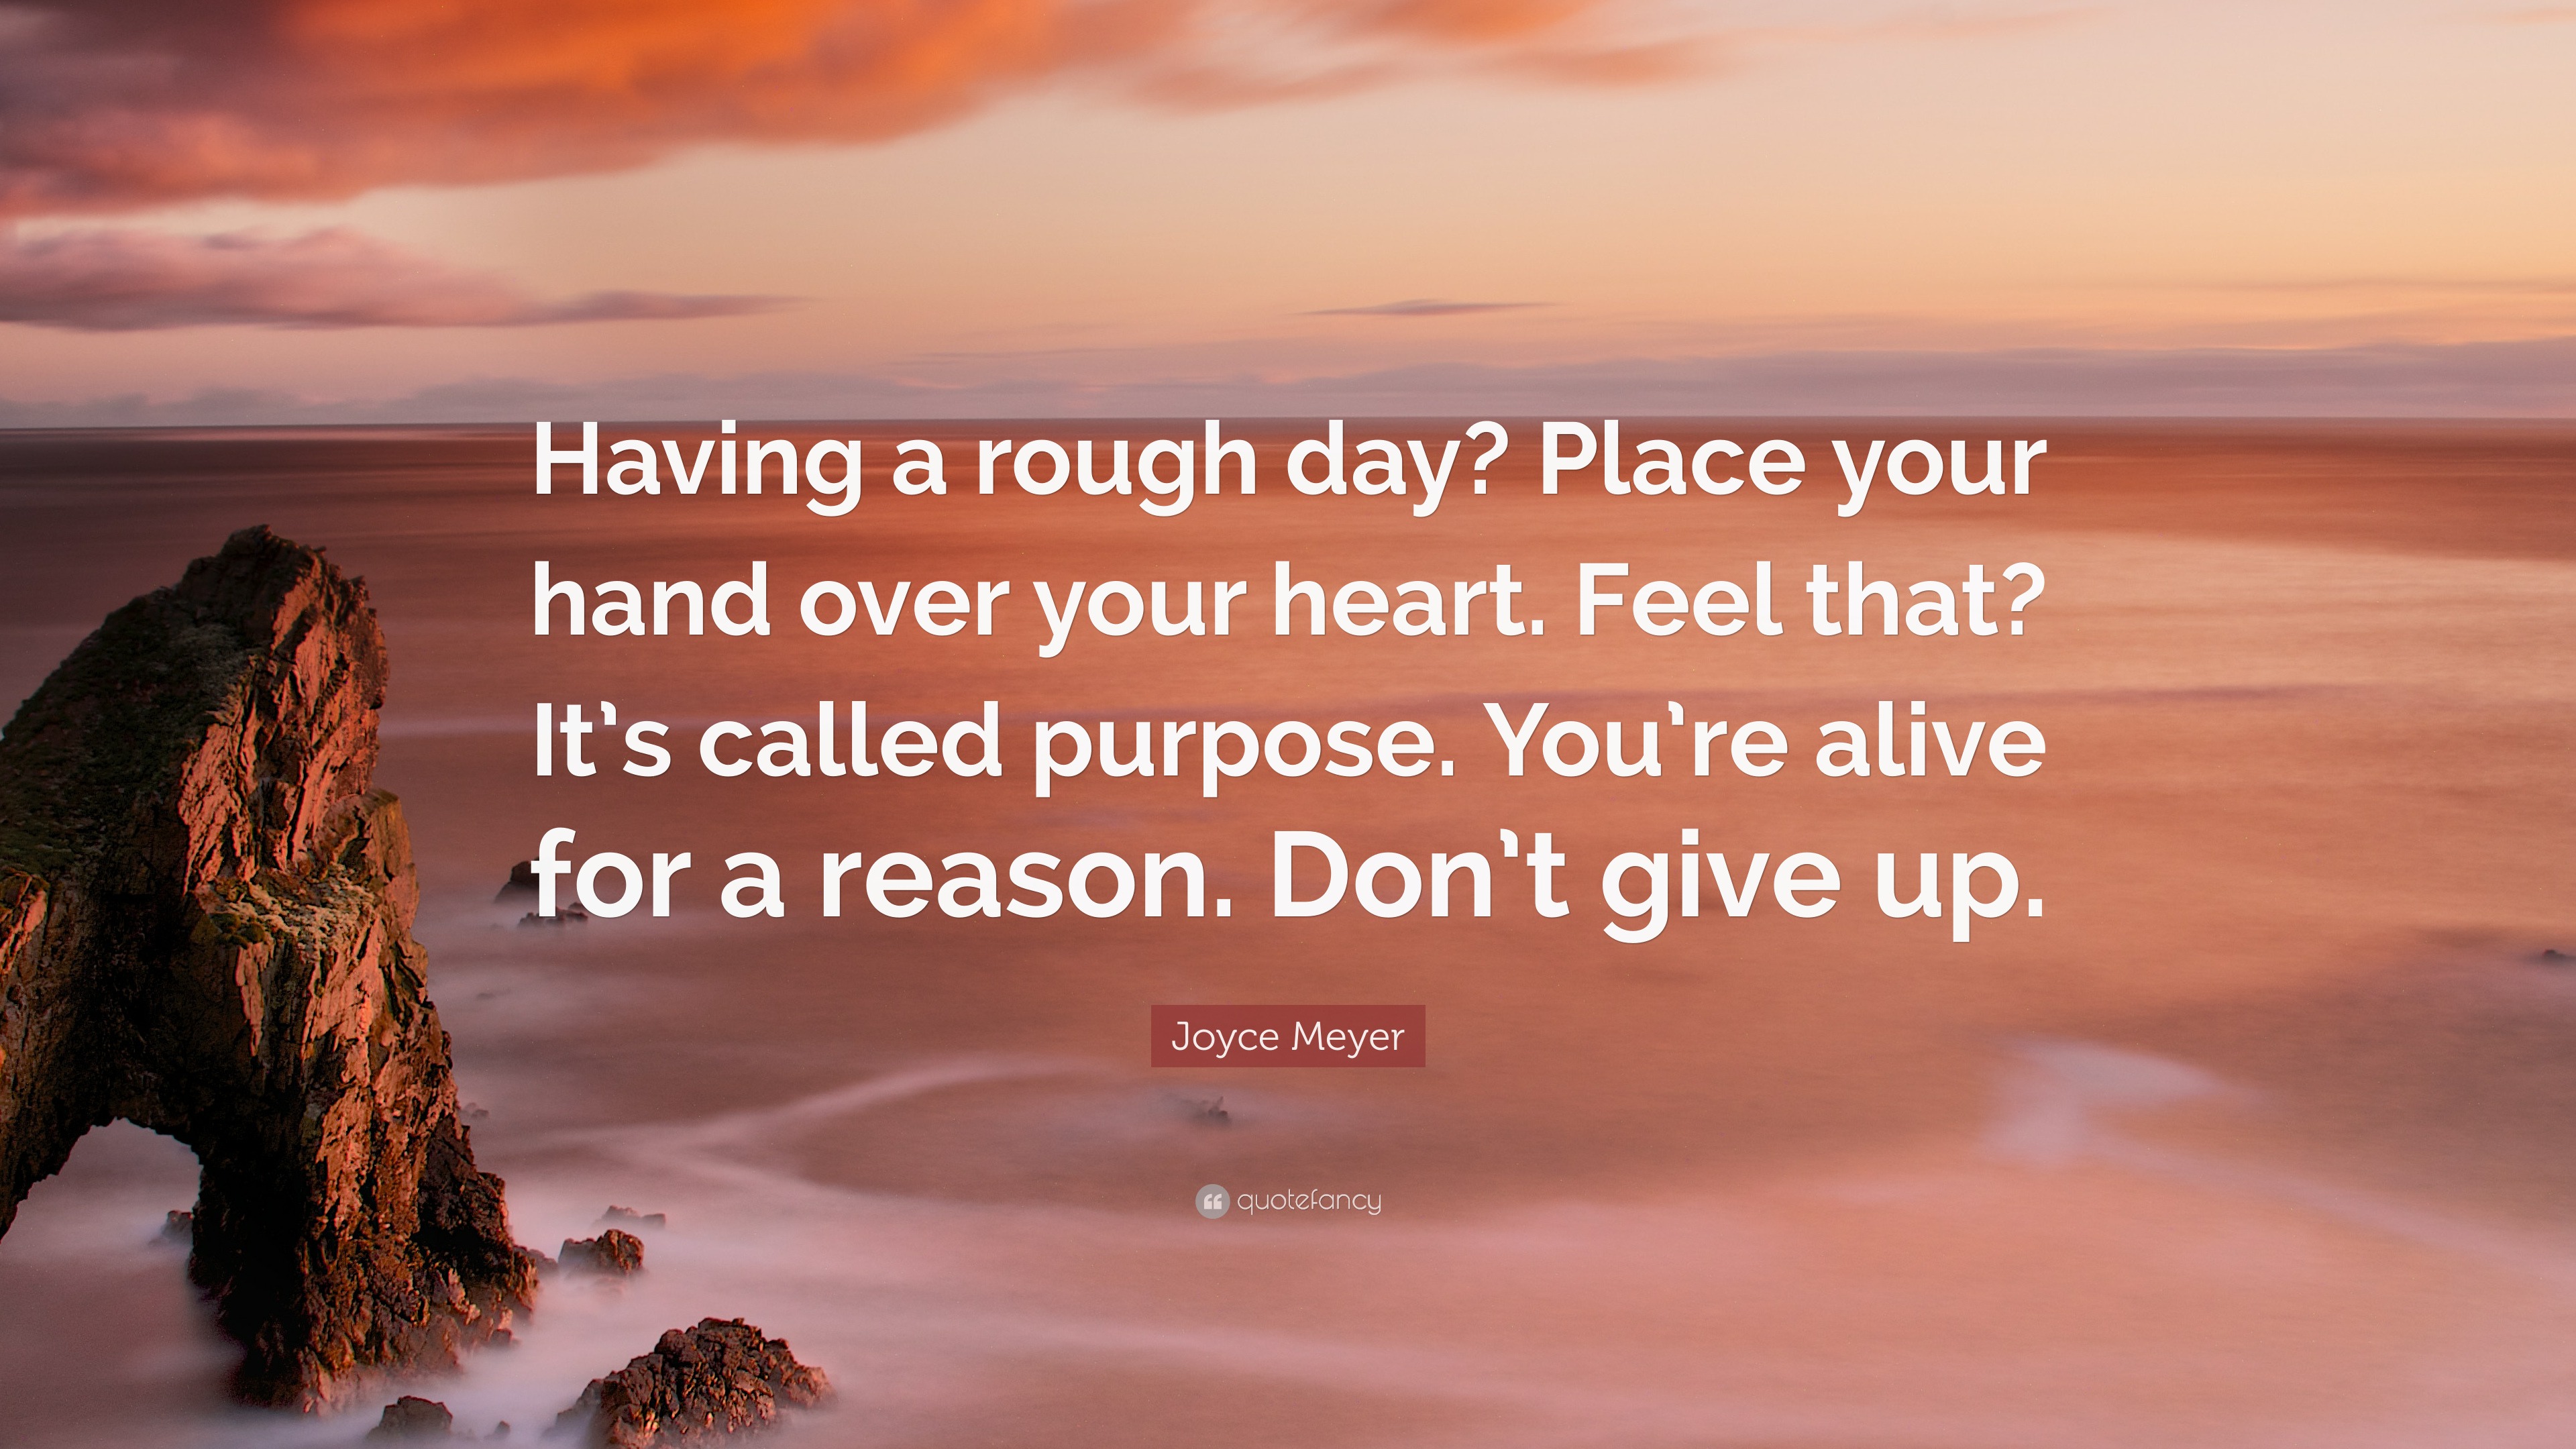 4685846 Joyce Meyer Quote Having a rough day Place your hand over your